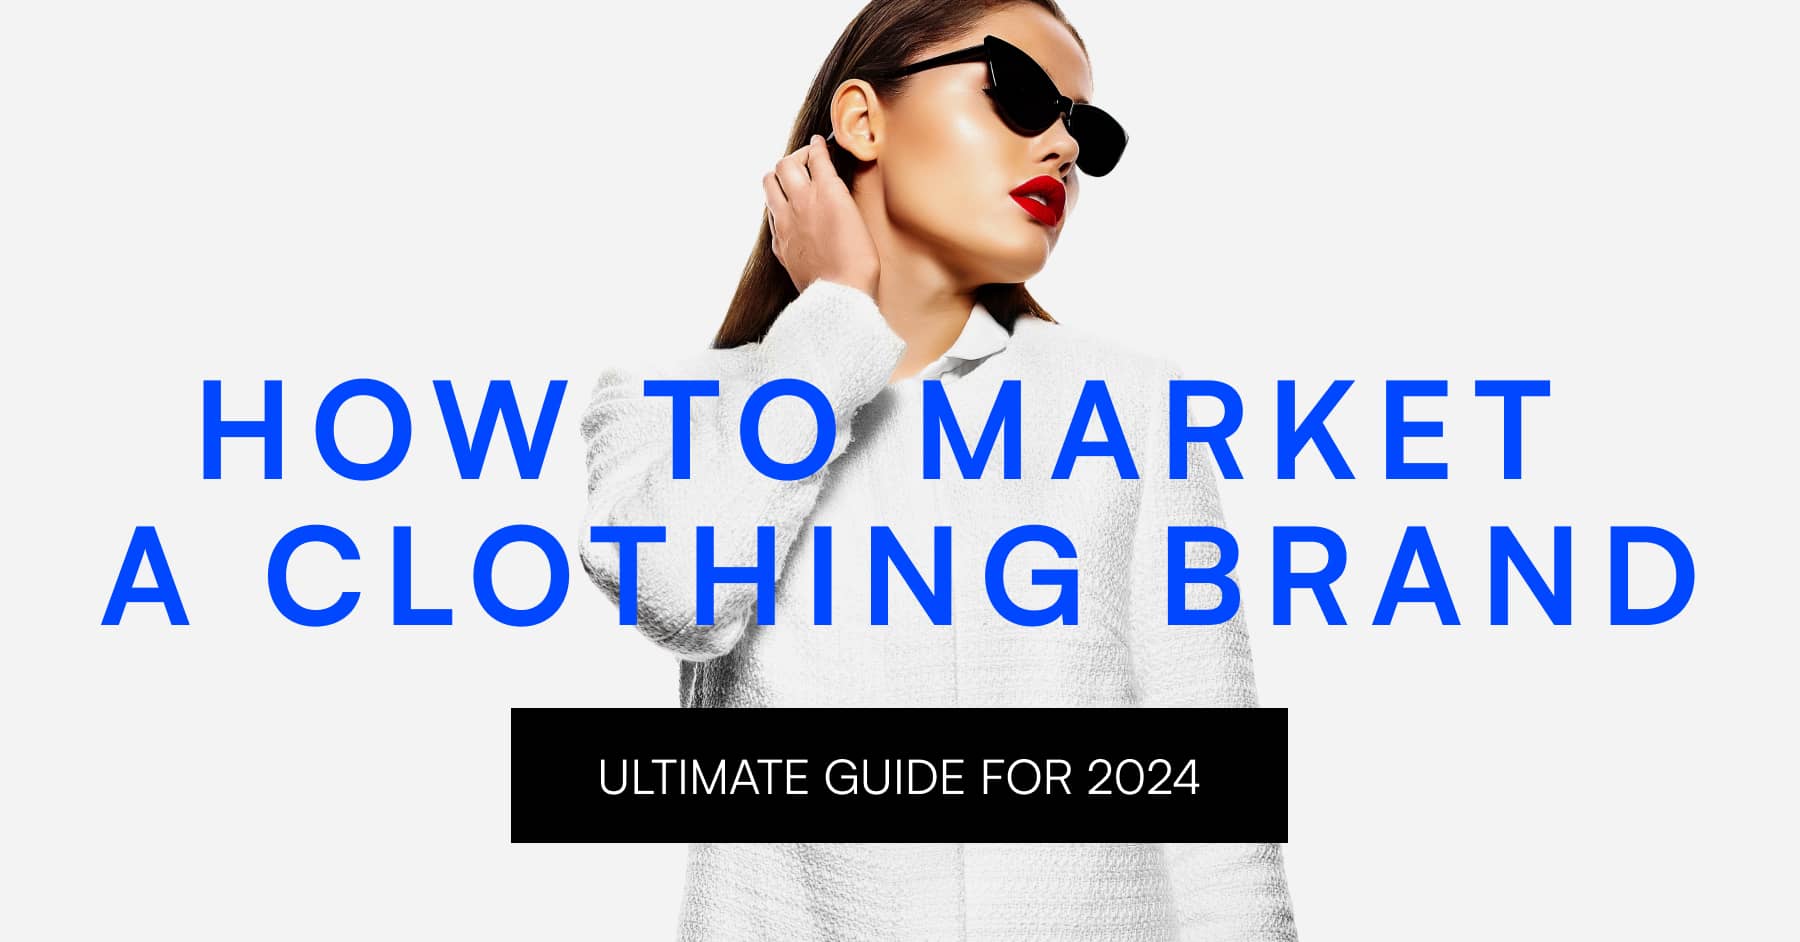 The ultimate guide to marketing your clothing brand.